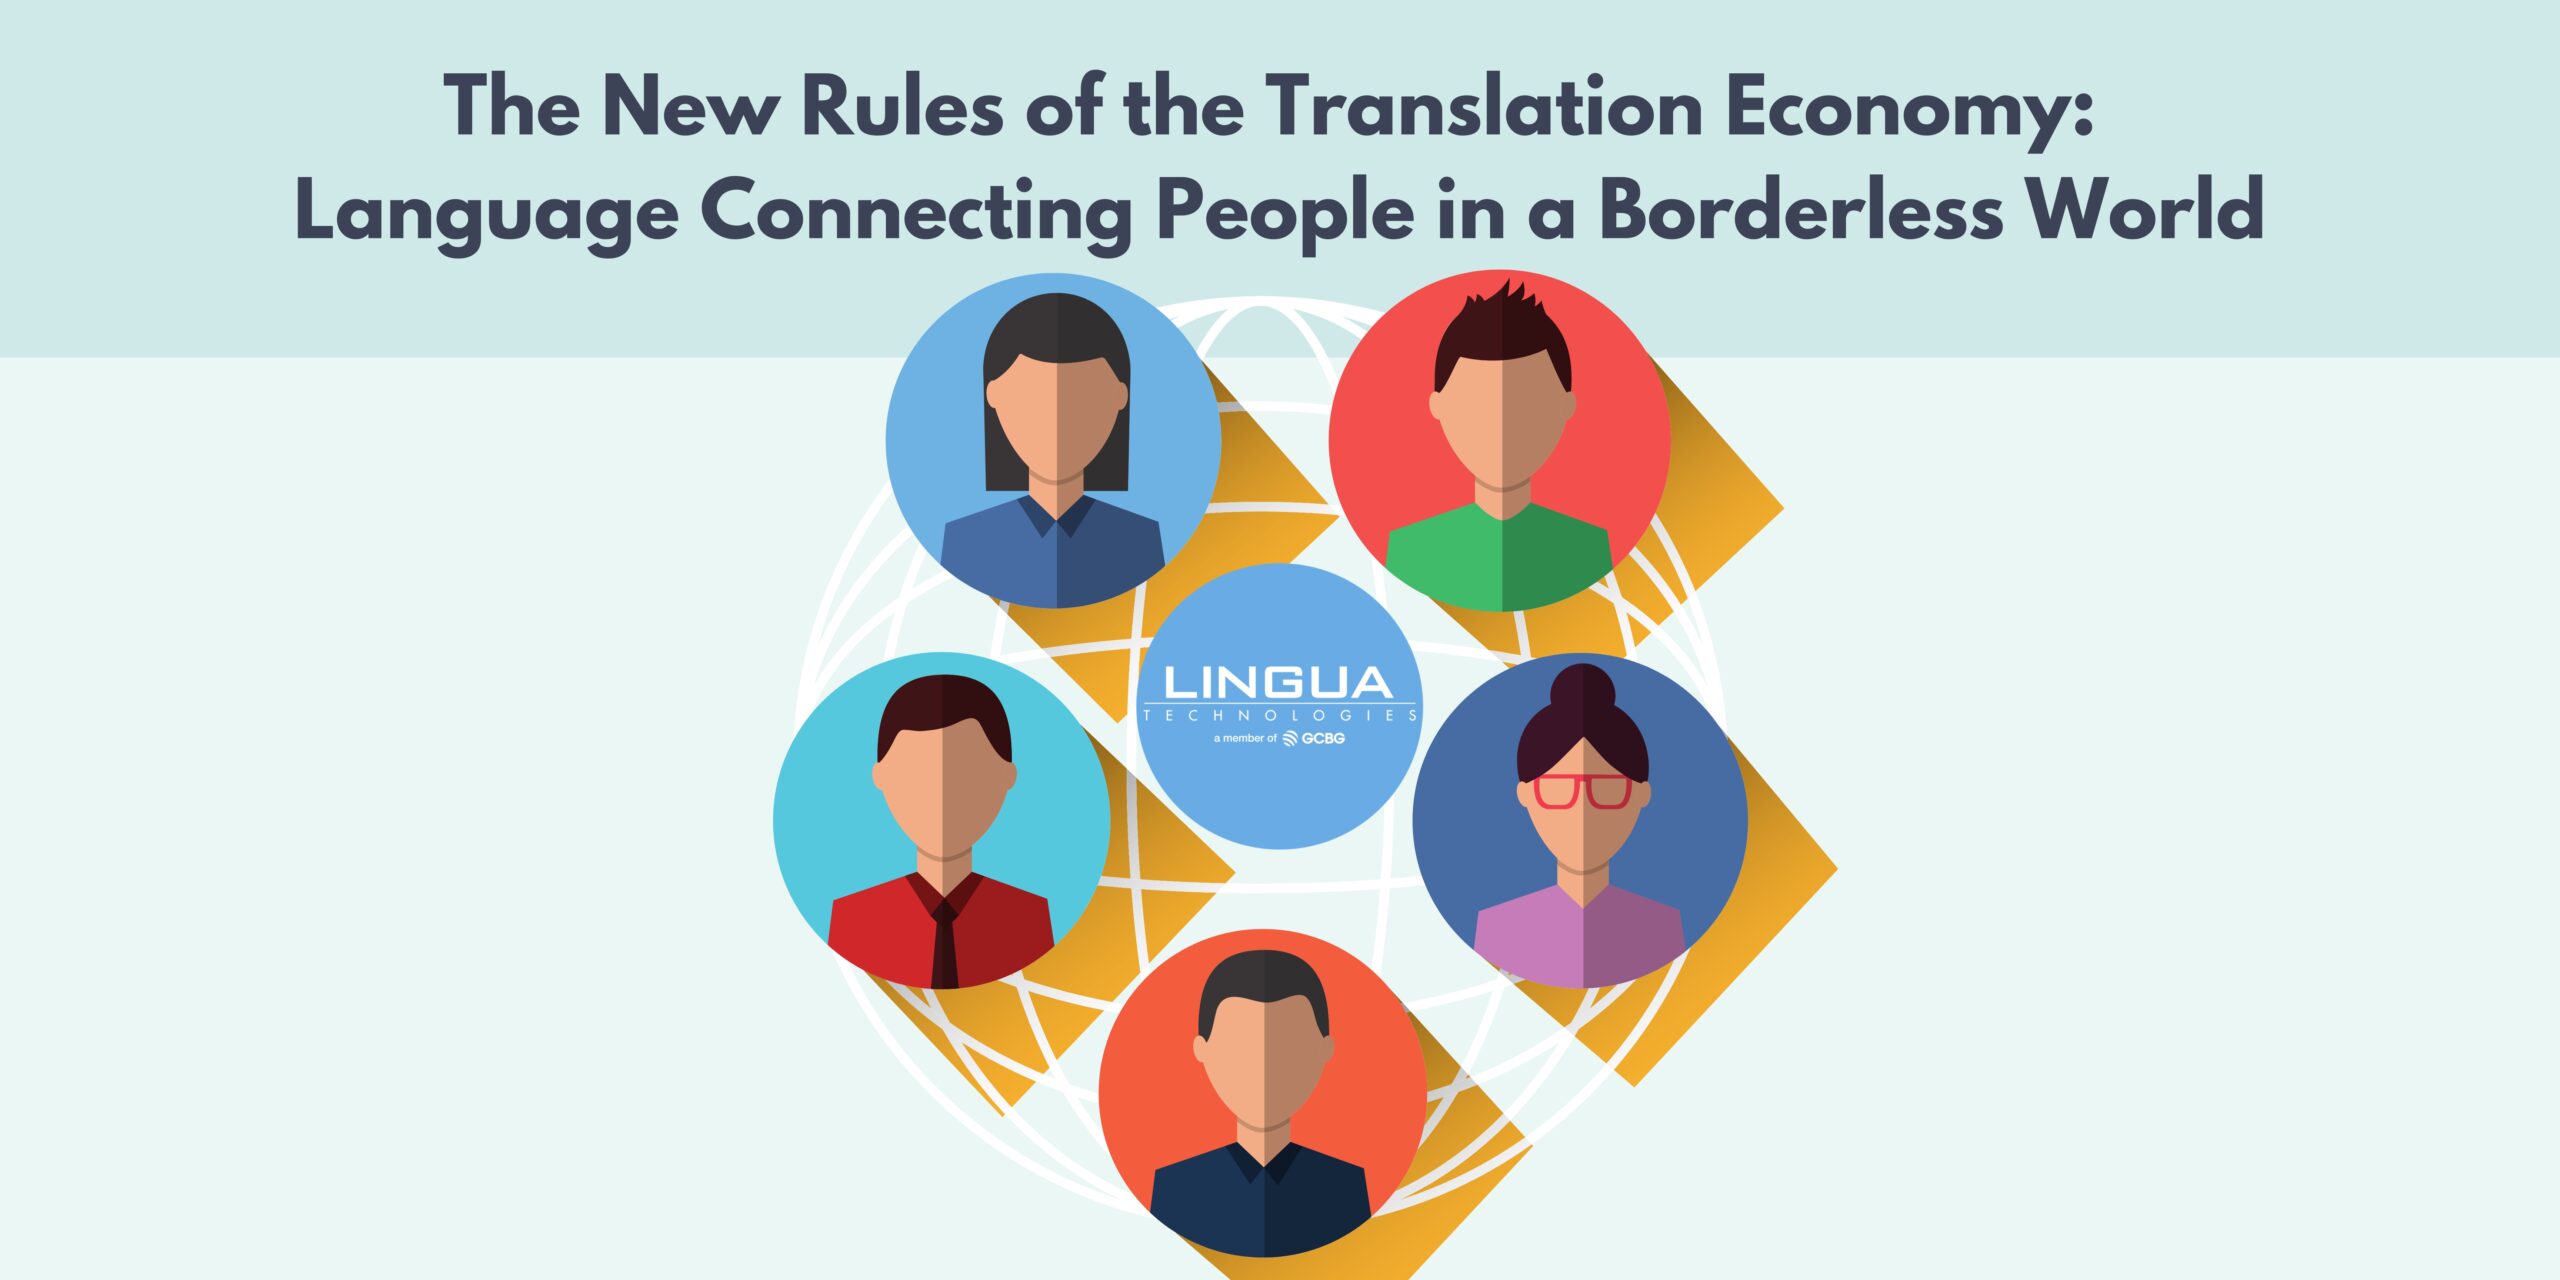 The New Rules of the Translation Economy